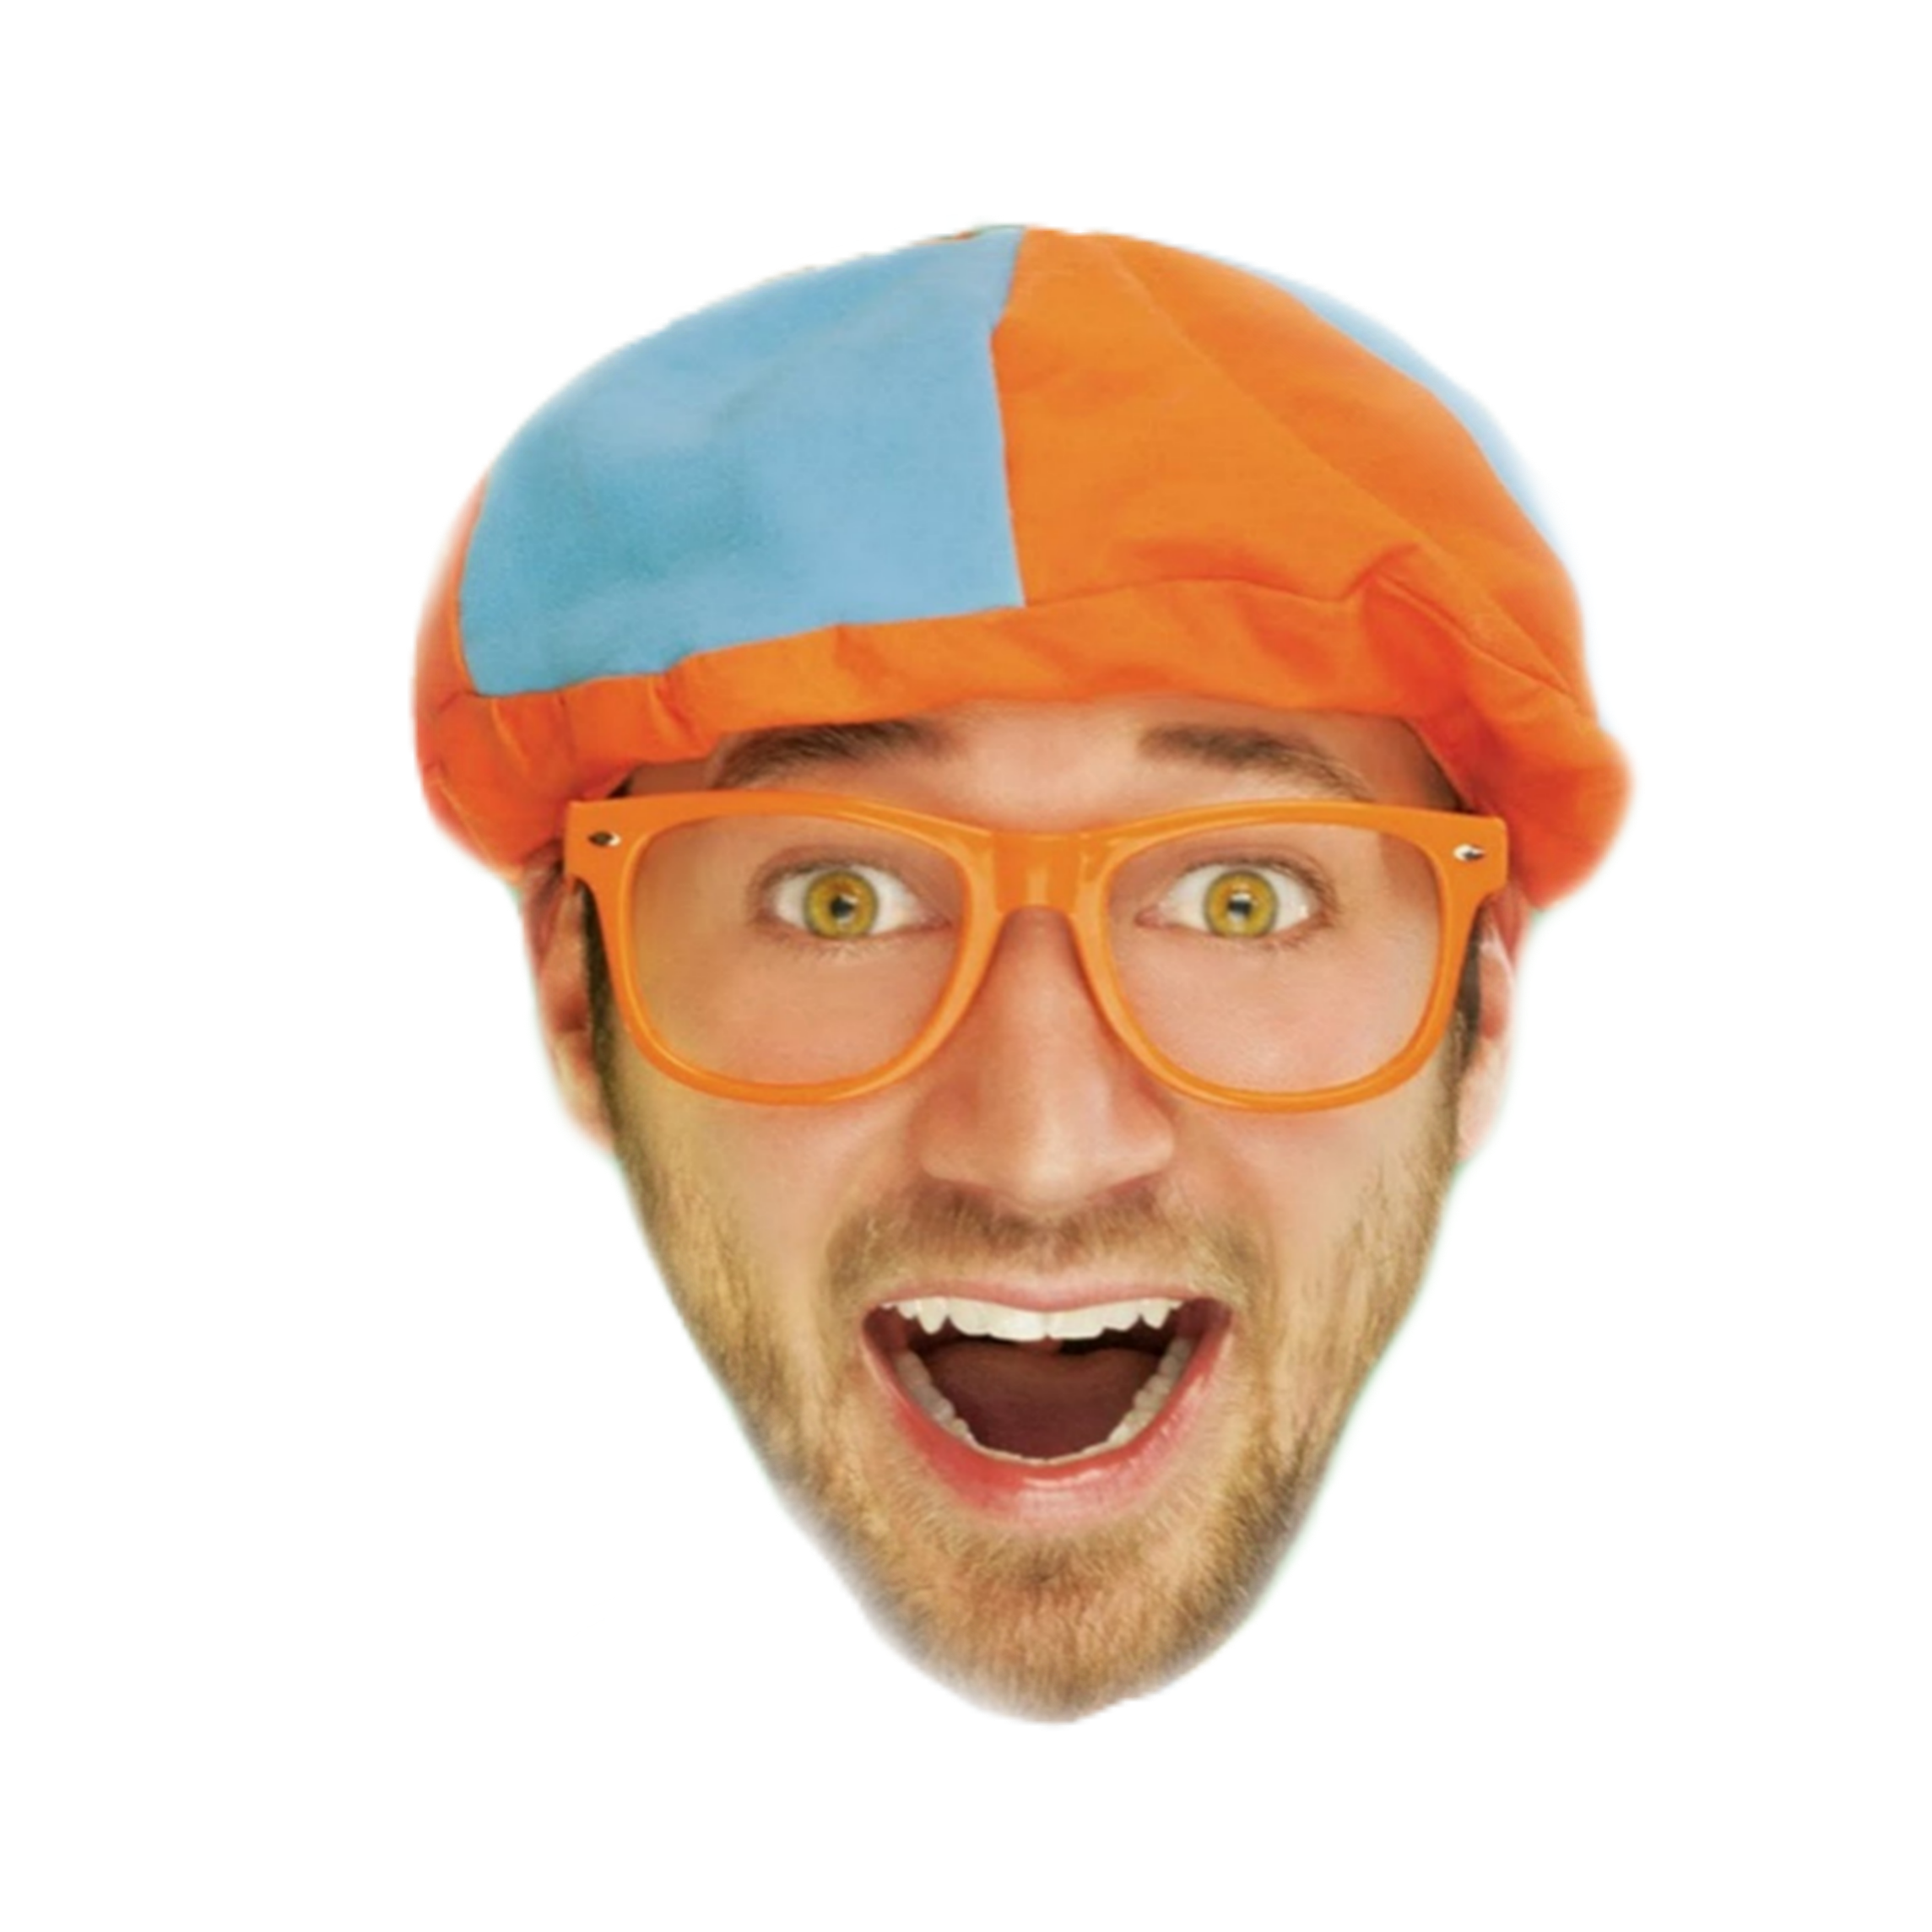 Popular and Trending blippi Stickers on PicsArt